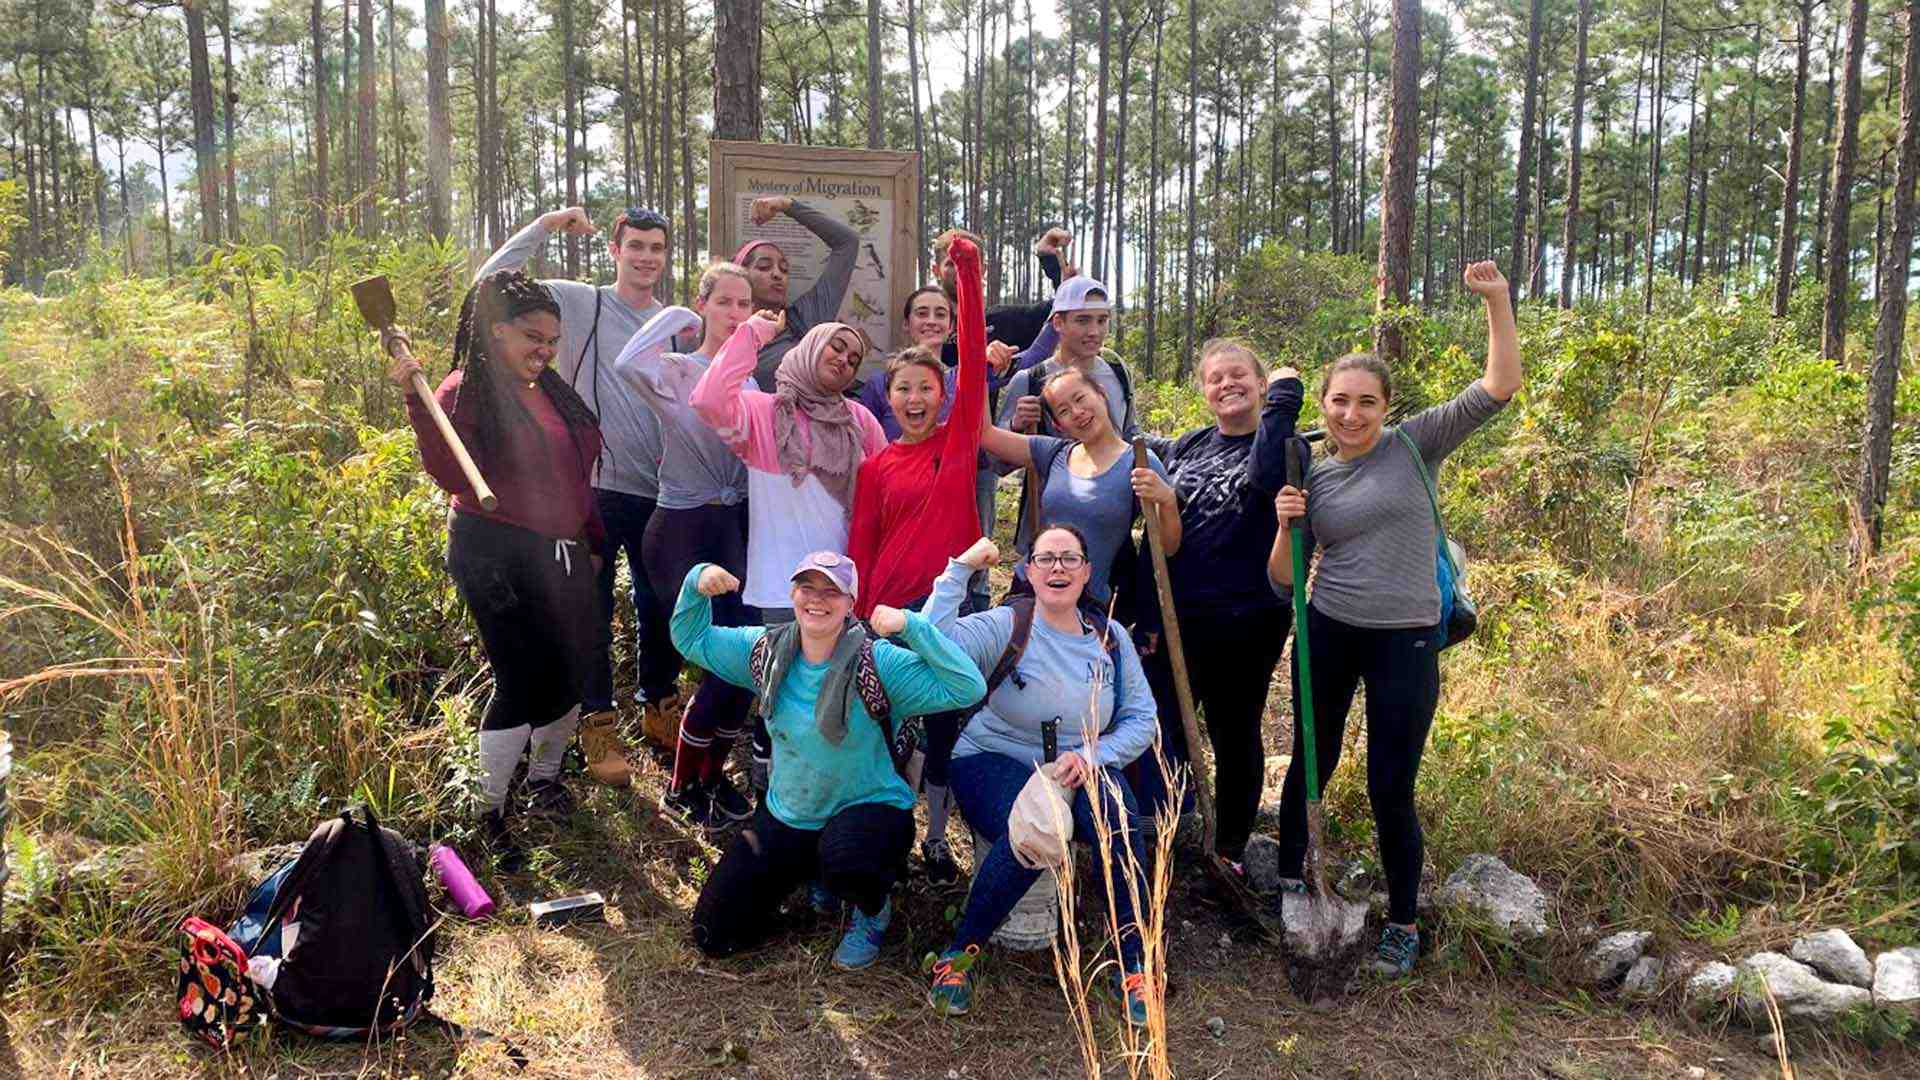 UMD students serve communities across the country—and sometimes internationally—through the Alternative Breaks program, as well as gain leadership experience and make new friends.